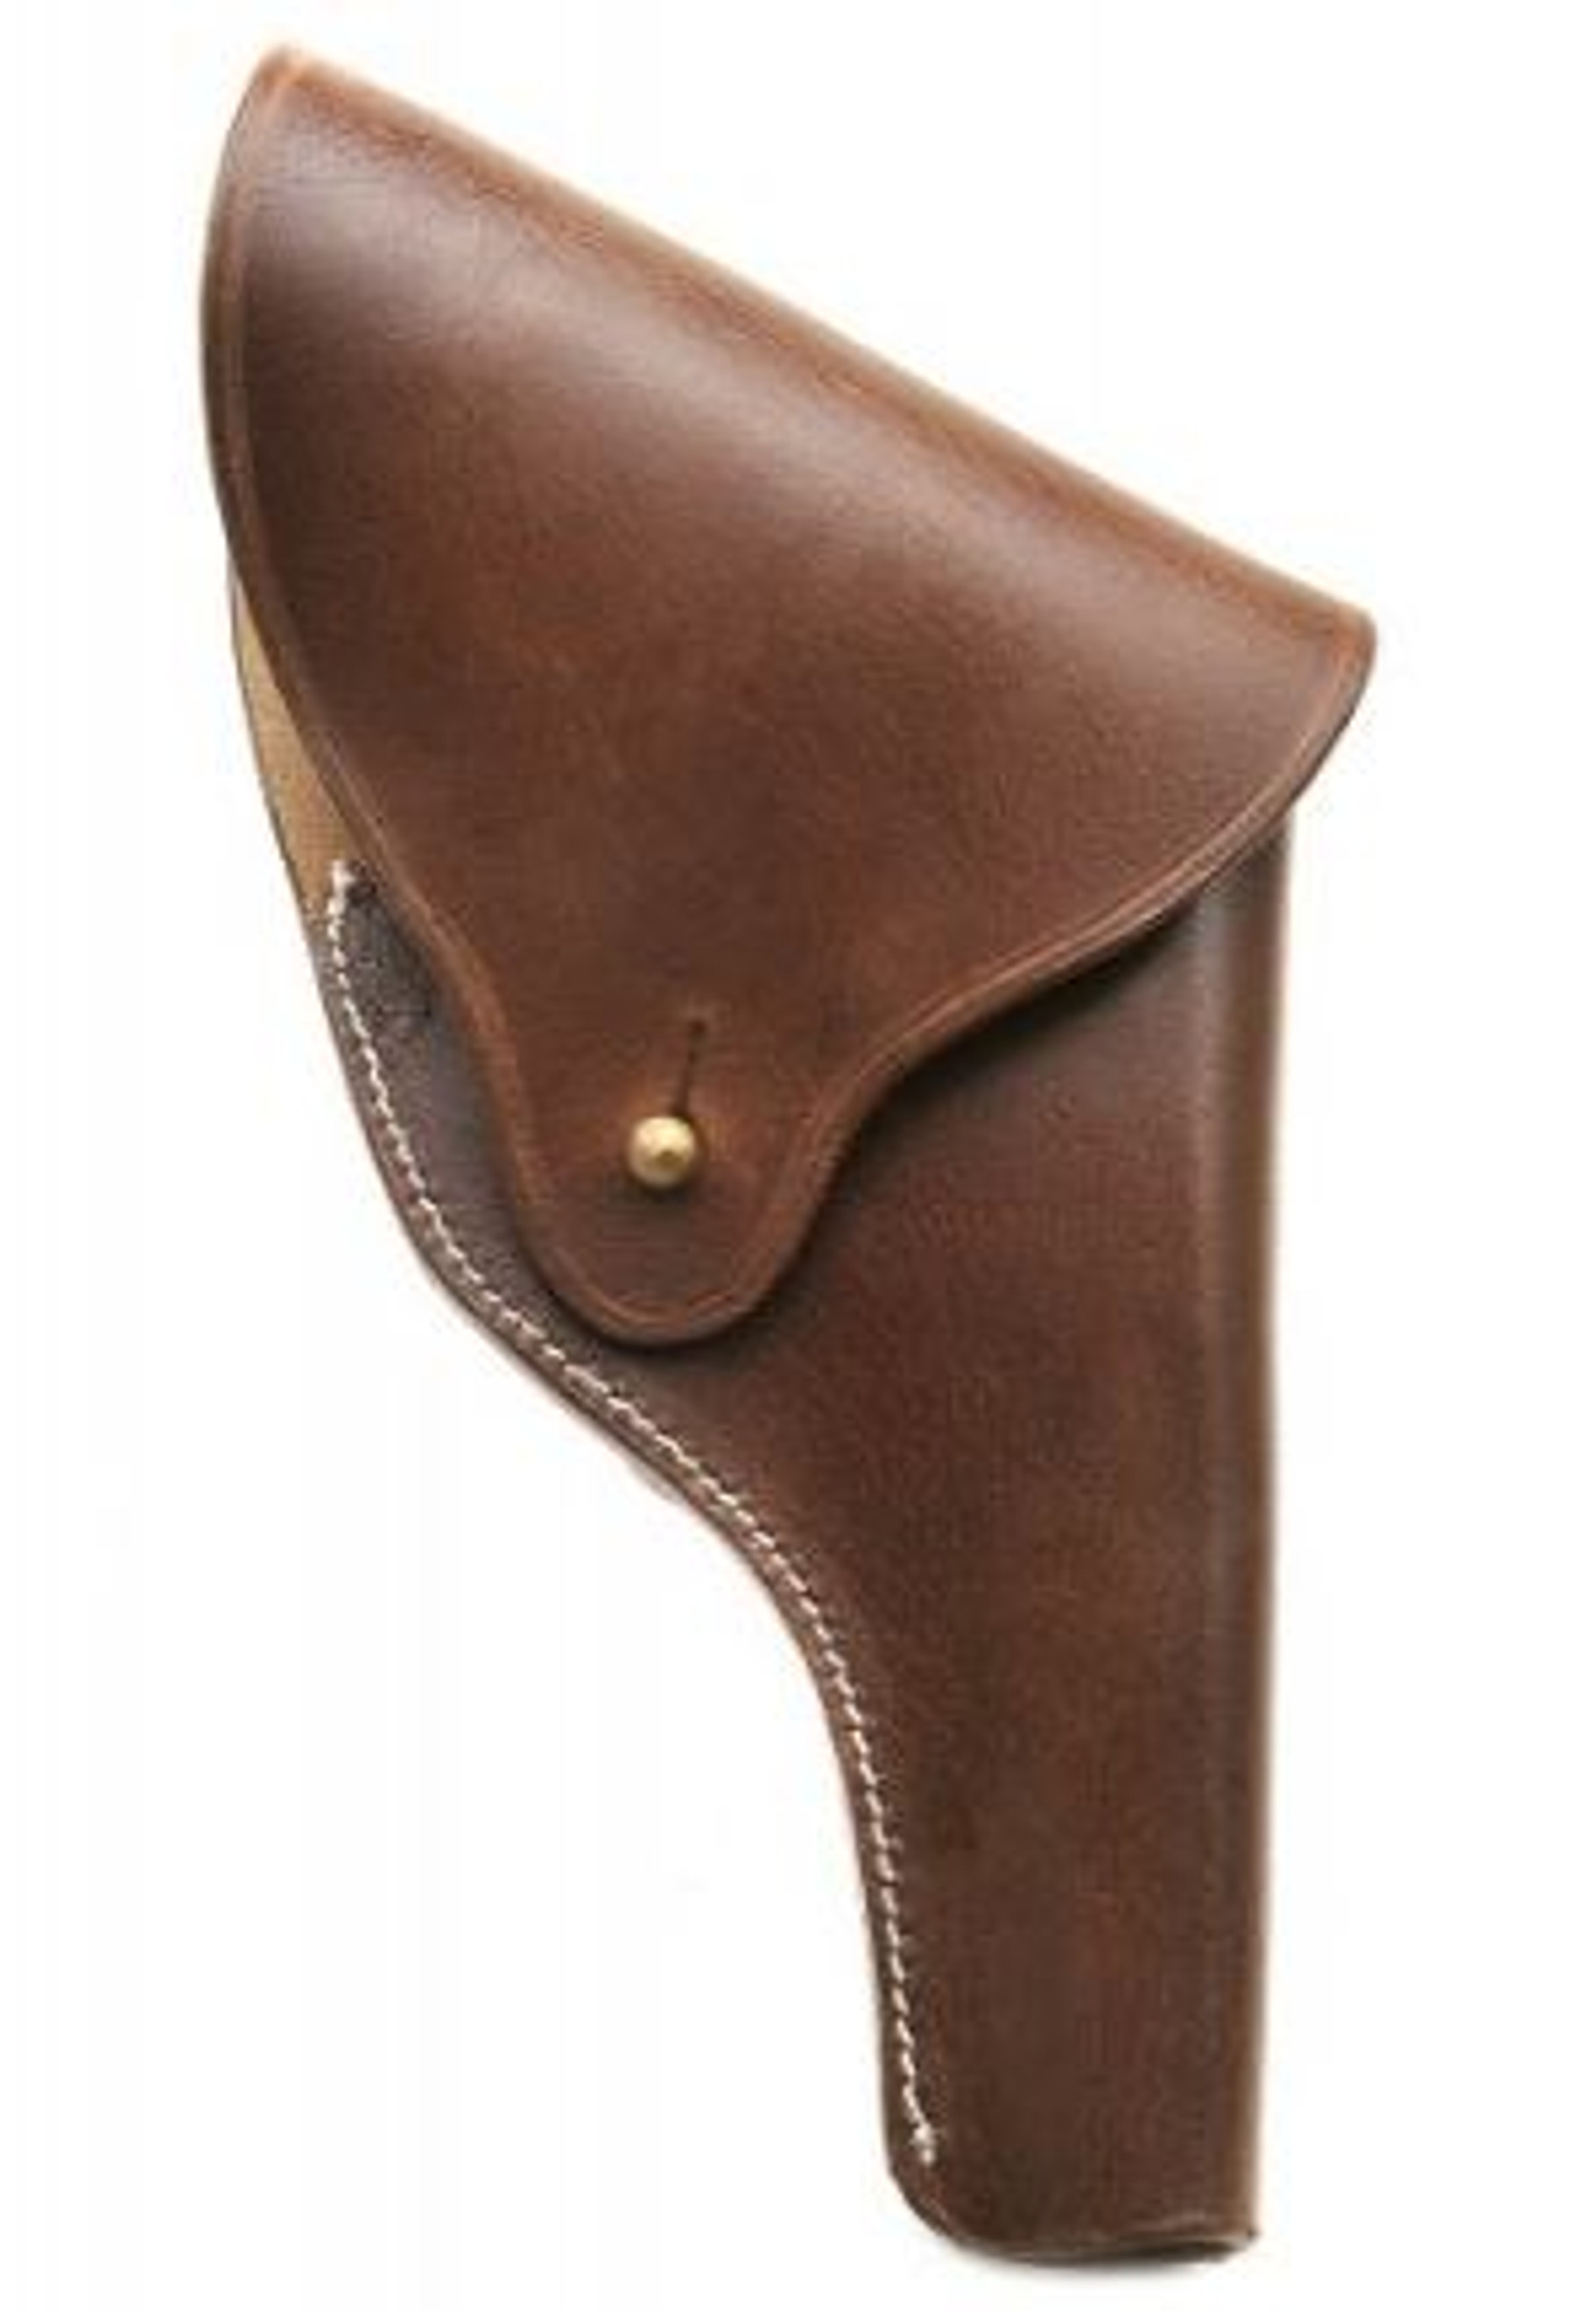 US Smith & Wesson Victory Model Revolver Holster Full Flap in Brown Leather .38 Special Model 10